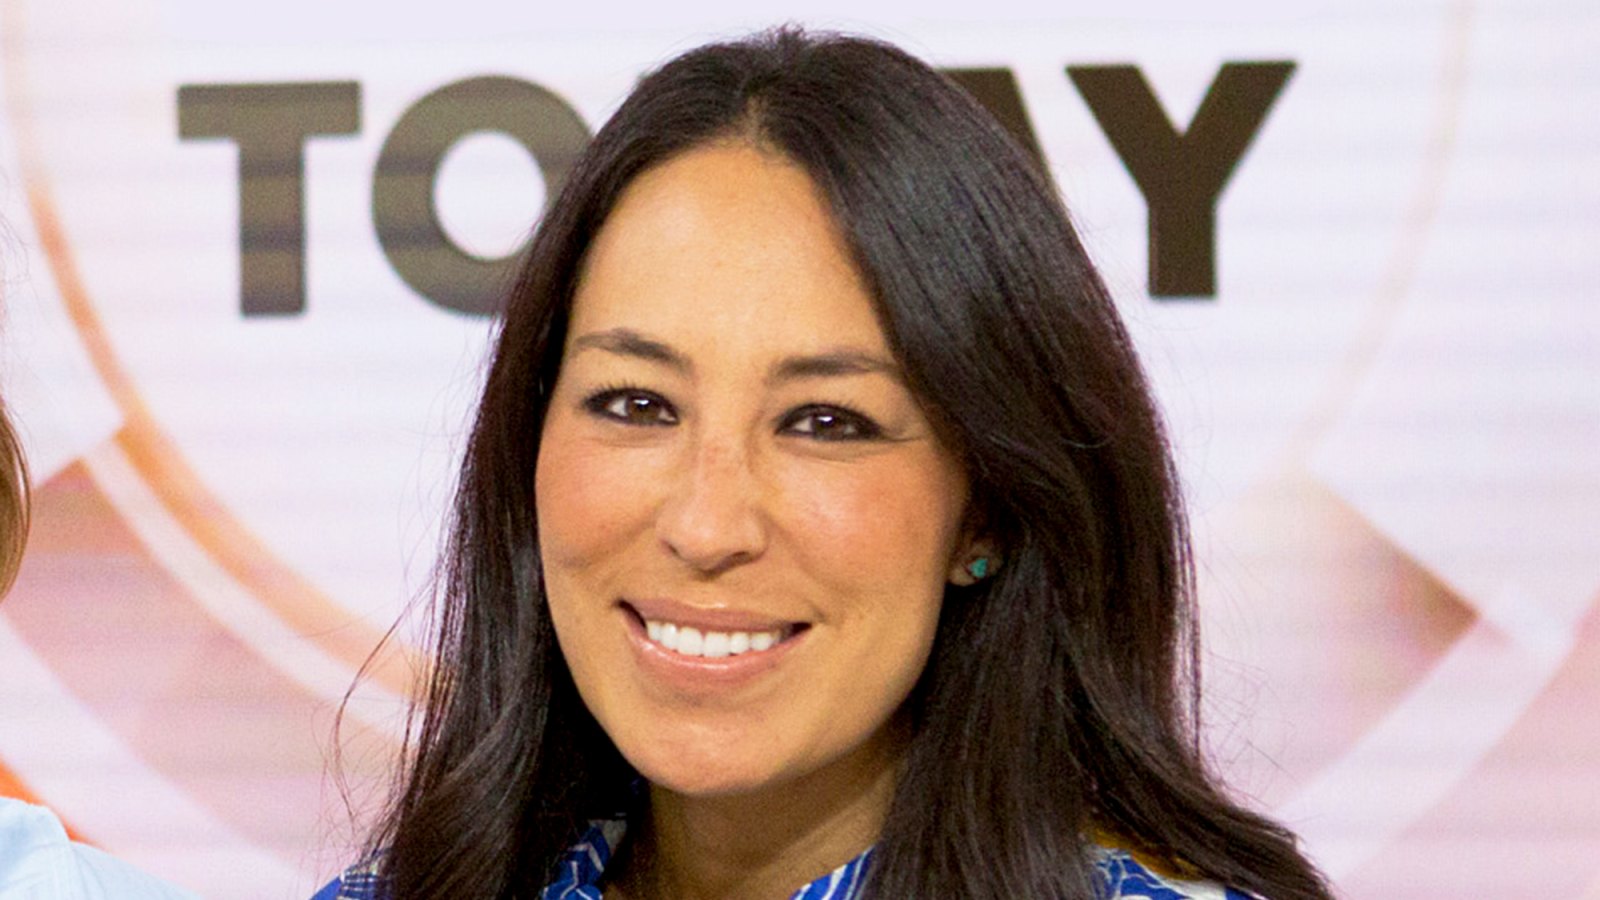 Joanna Gaines on ‘Today‘ show